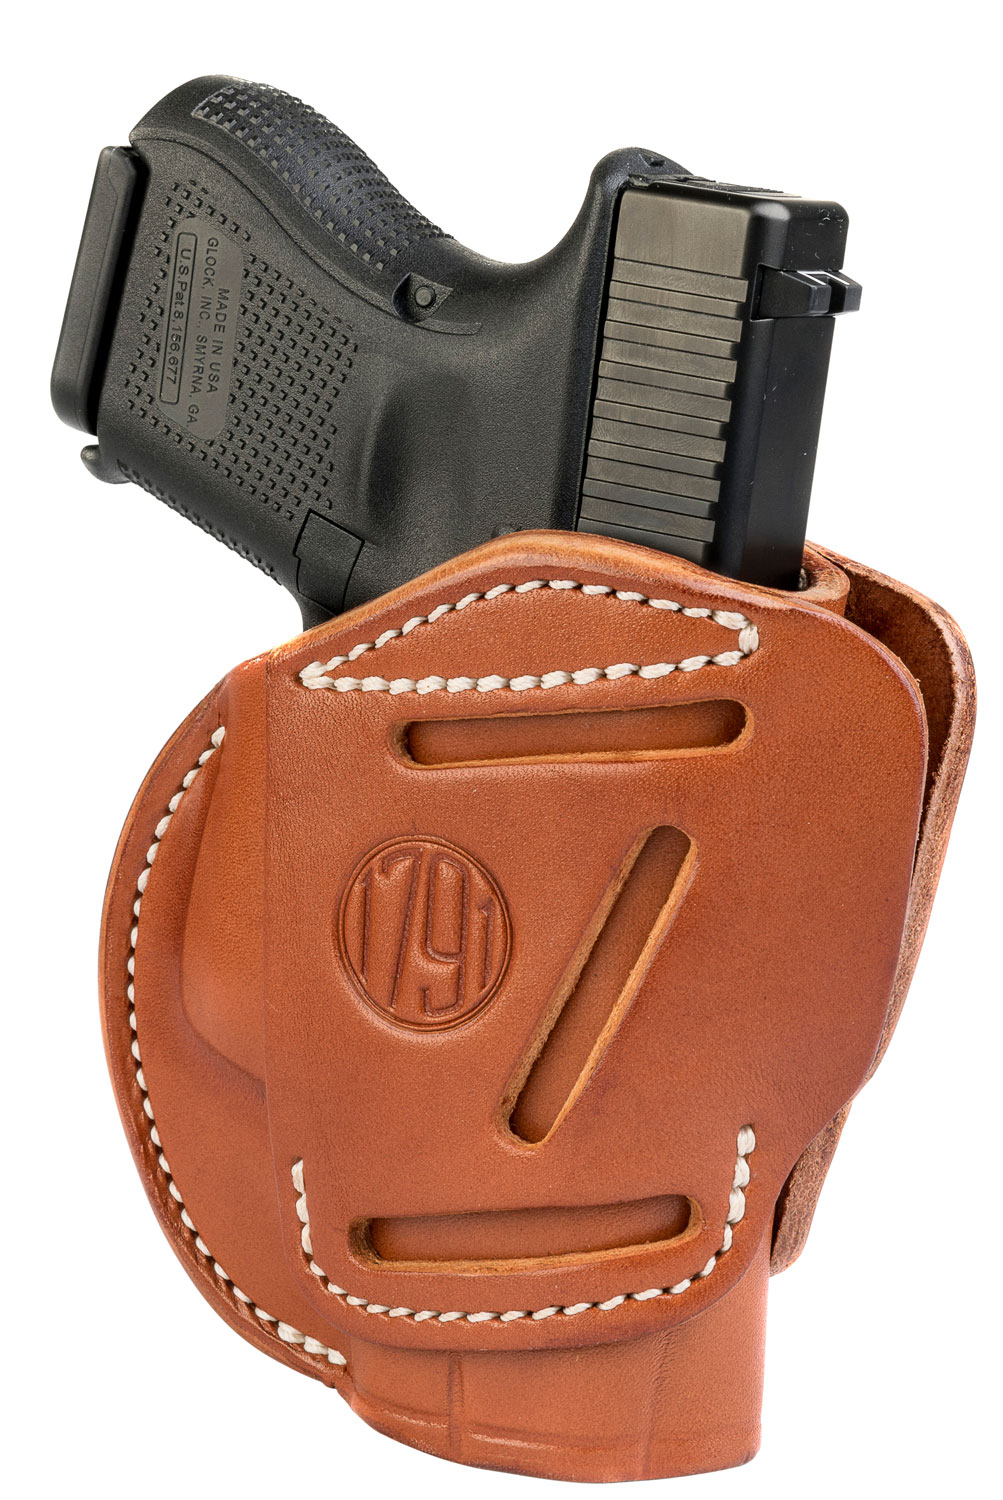 1791 Gunleather 3WH3CBRA 3-Way  OWB Size 03 Classic Brown Leather Belt Loop Compatible w/Glock 26/Ruger LC9/S&W M&P Shield Ambidextrous